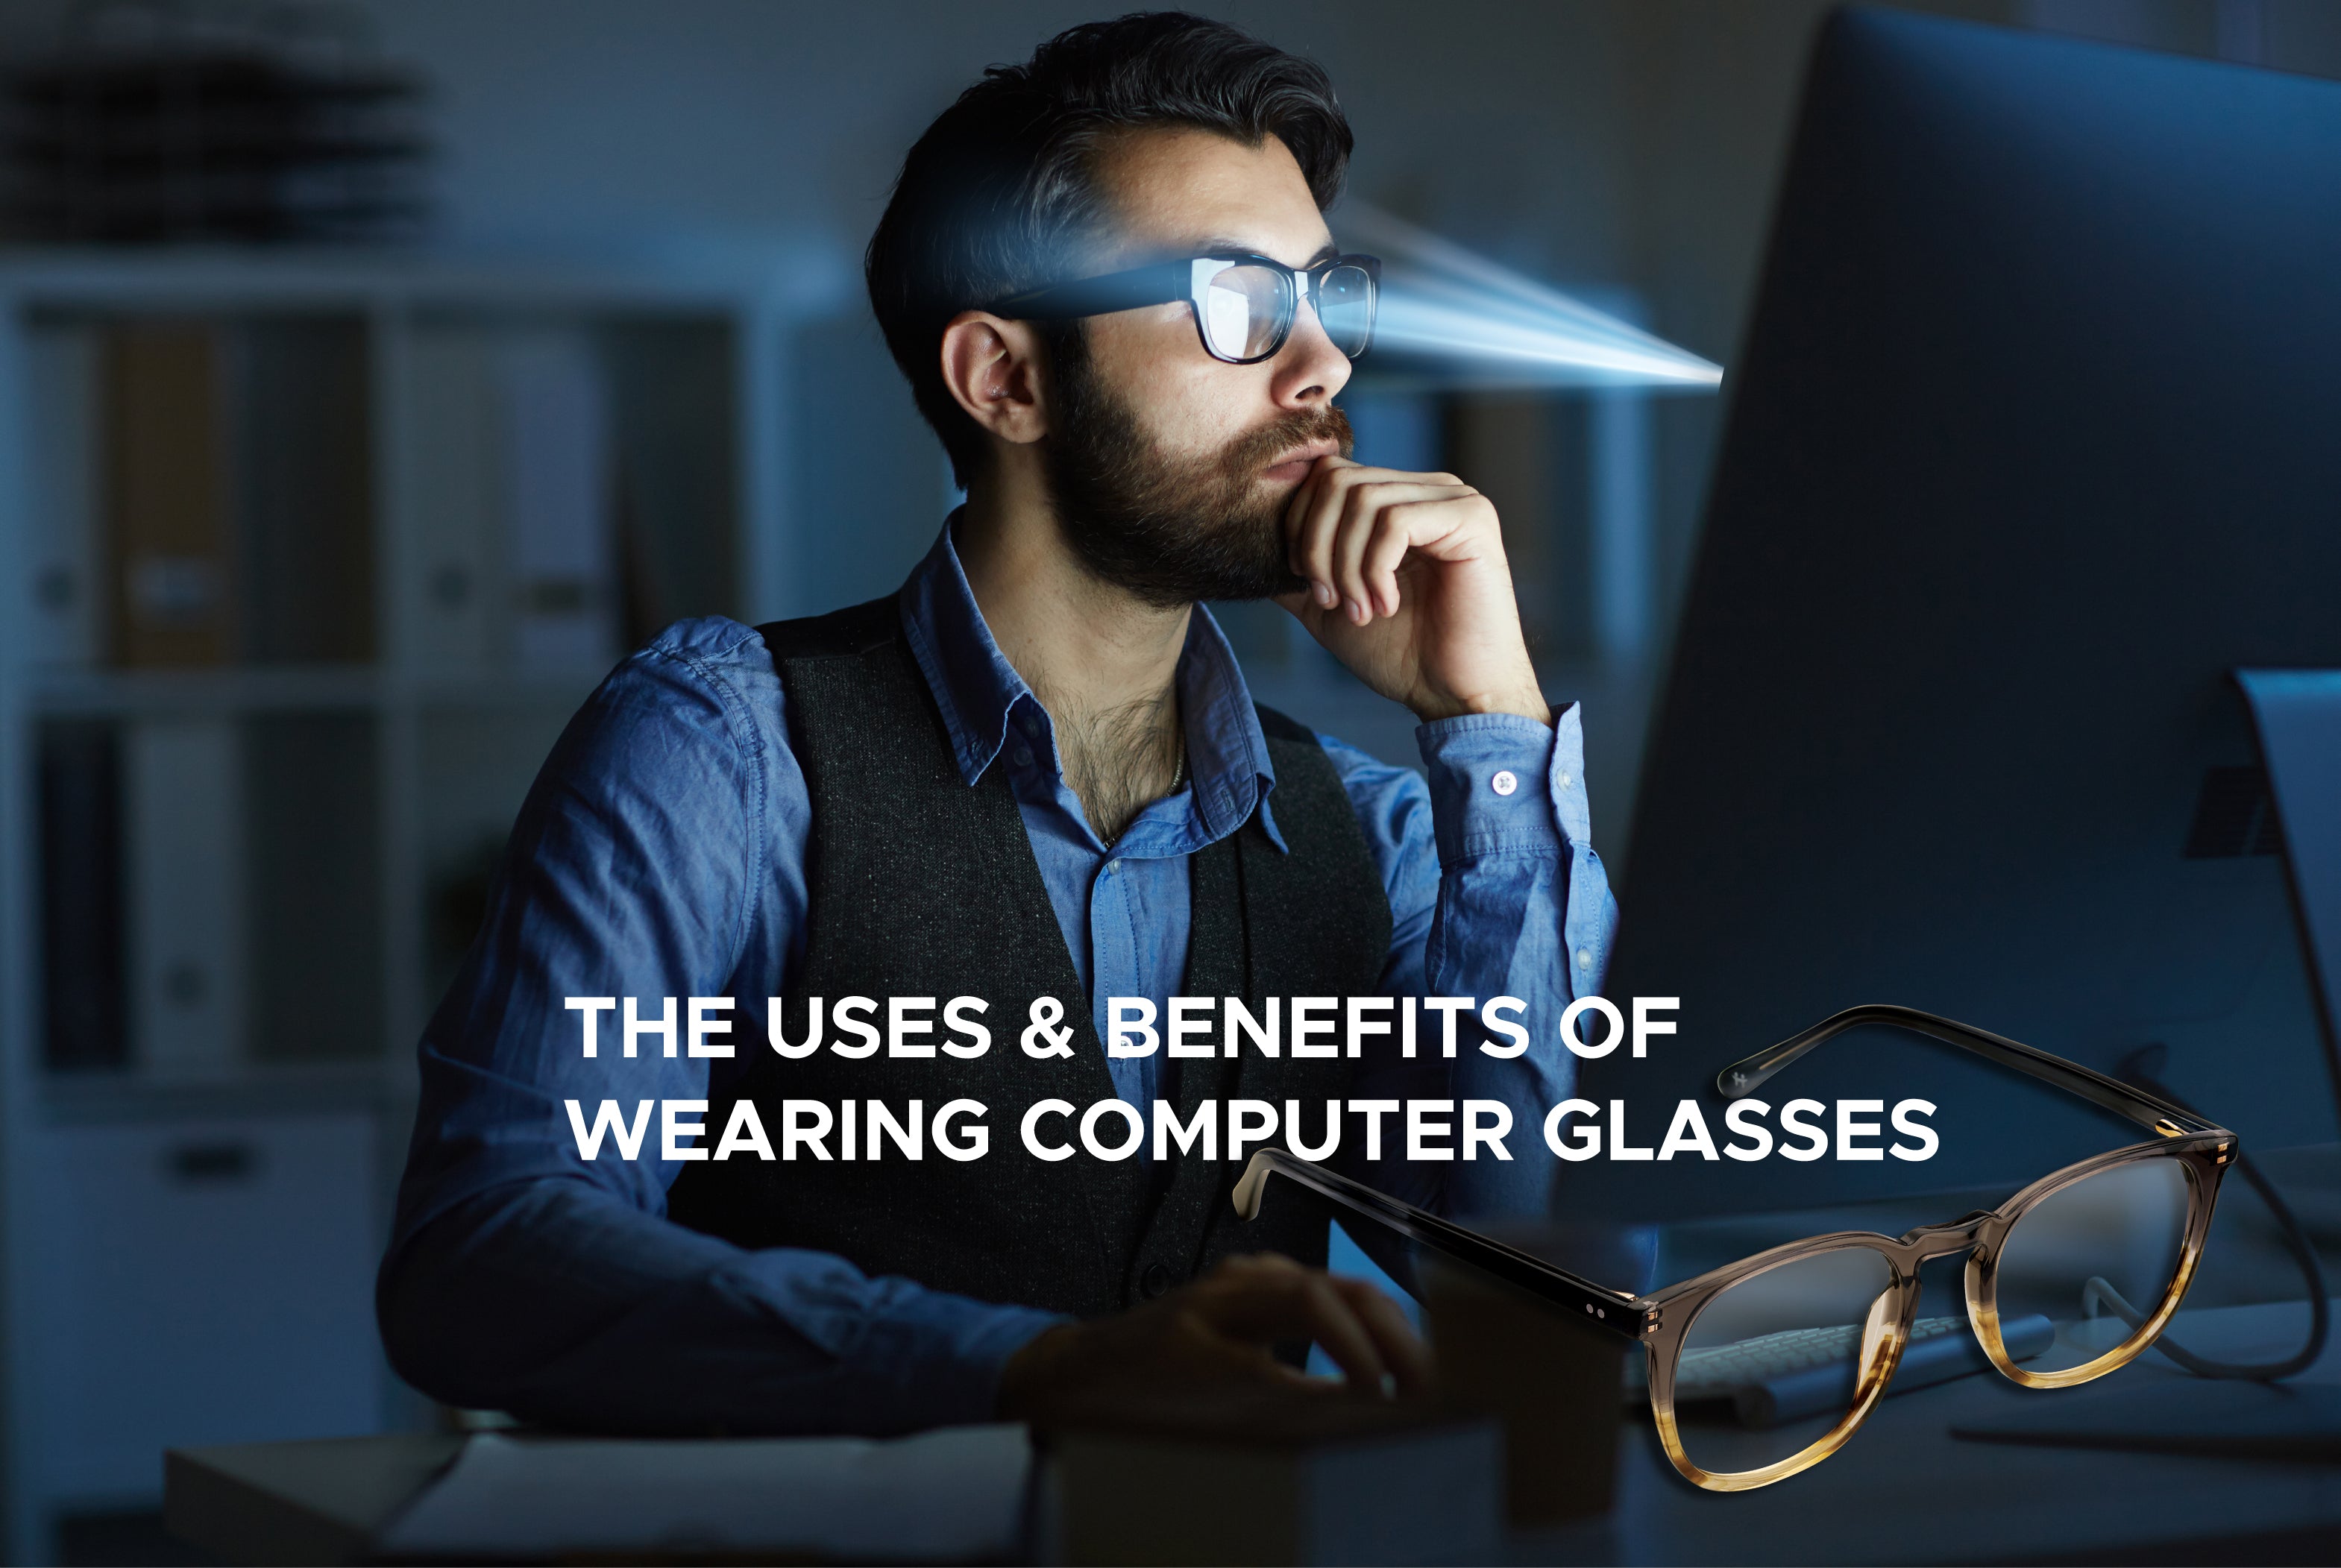 Should I wear sunglasses while using computer?